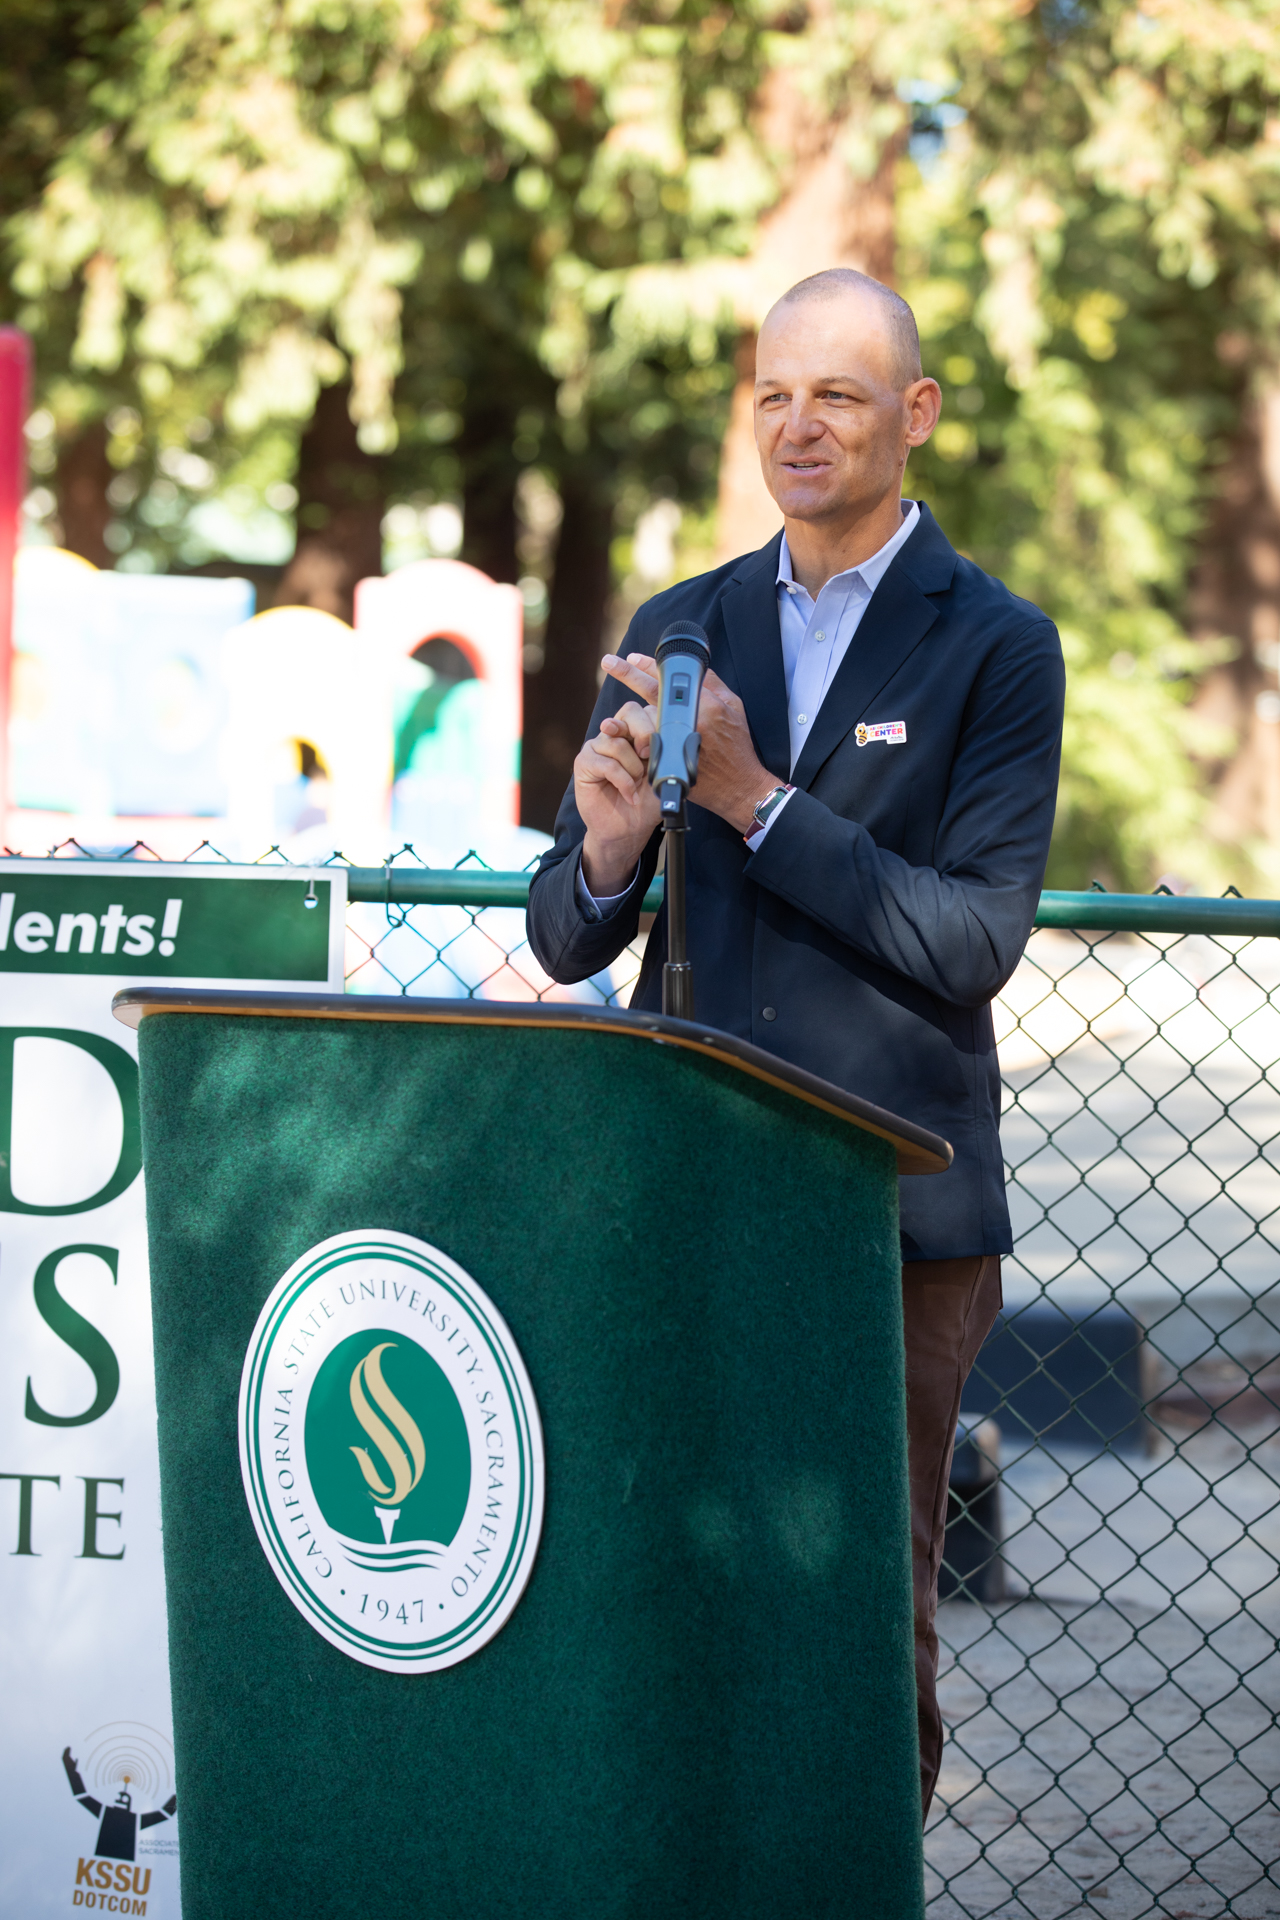 California Assemblymember Kevin McCarty speaks behind a podium in front of the Sacramento State ASI Children's Center playground.